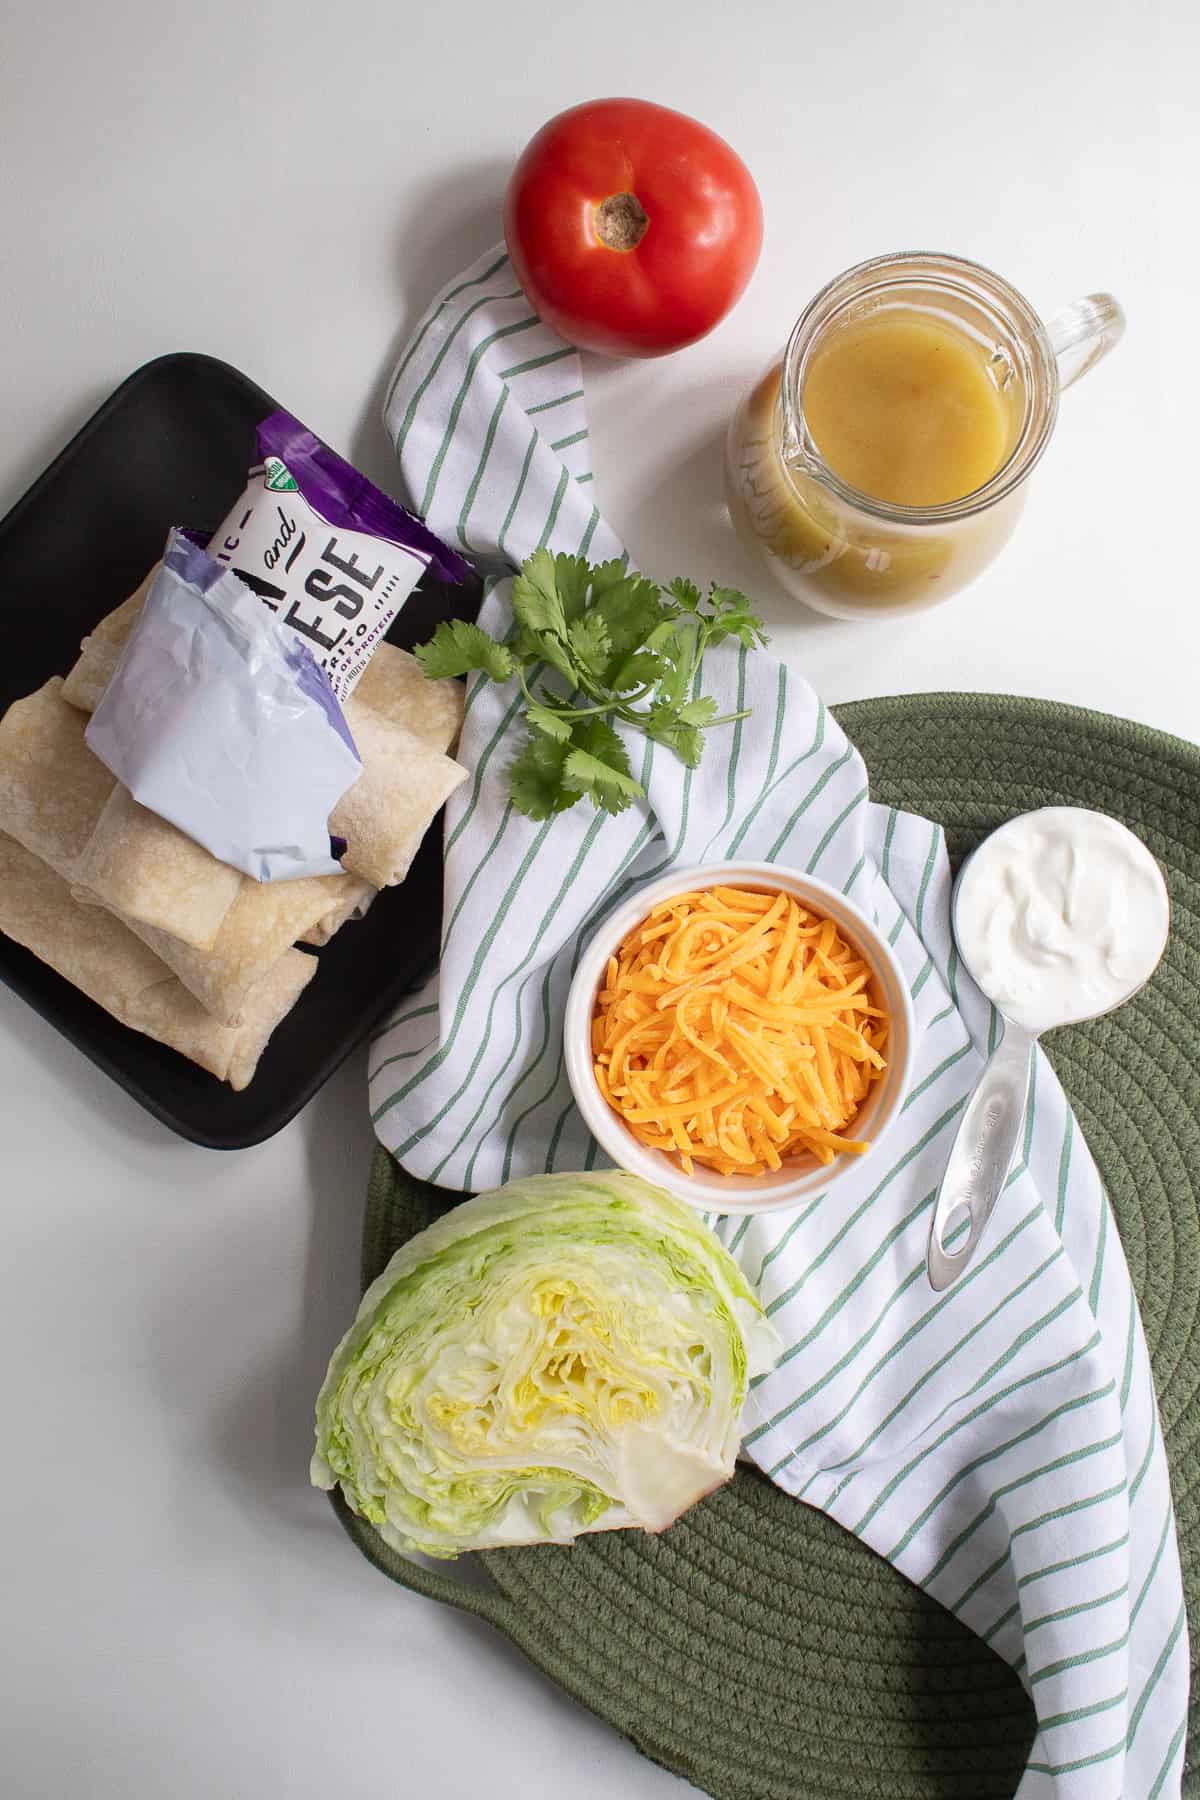 The ingredients for the burrito casserole are displayed on a green and white surface.